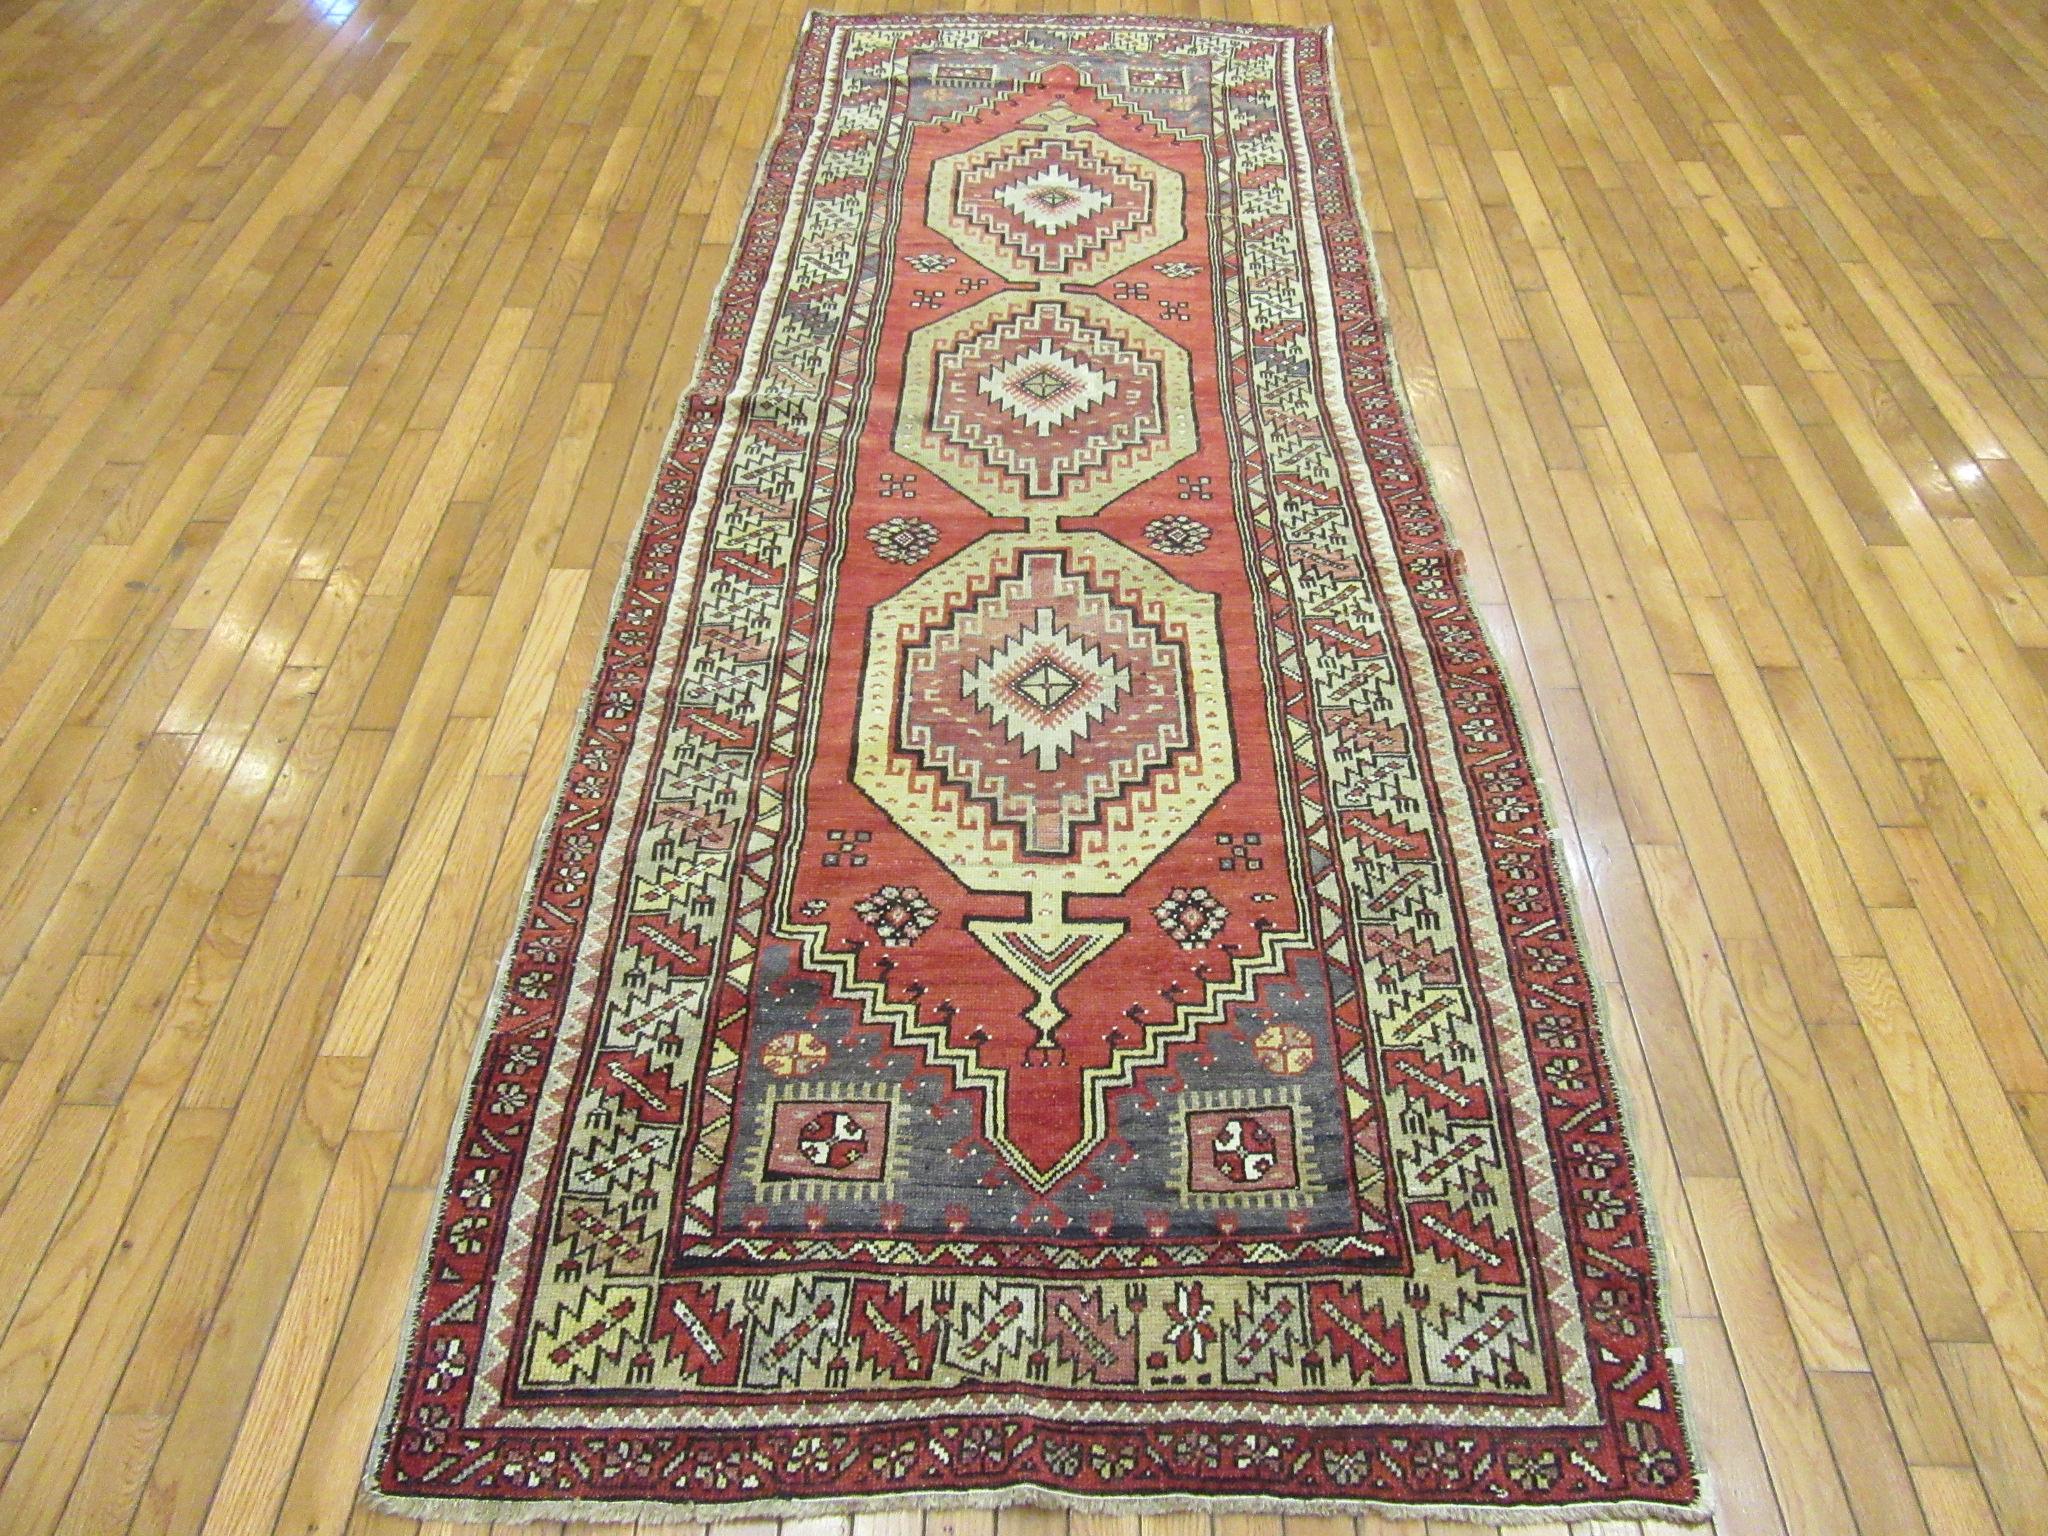 This is a vintage Turkish Anatolian rug made with 100% wool and all natural dyes. Bring life and elegance to your space with this beautiful rug in rich yet soft colors. It measures 3.8” x 10” and in great condition.